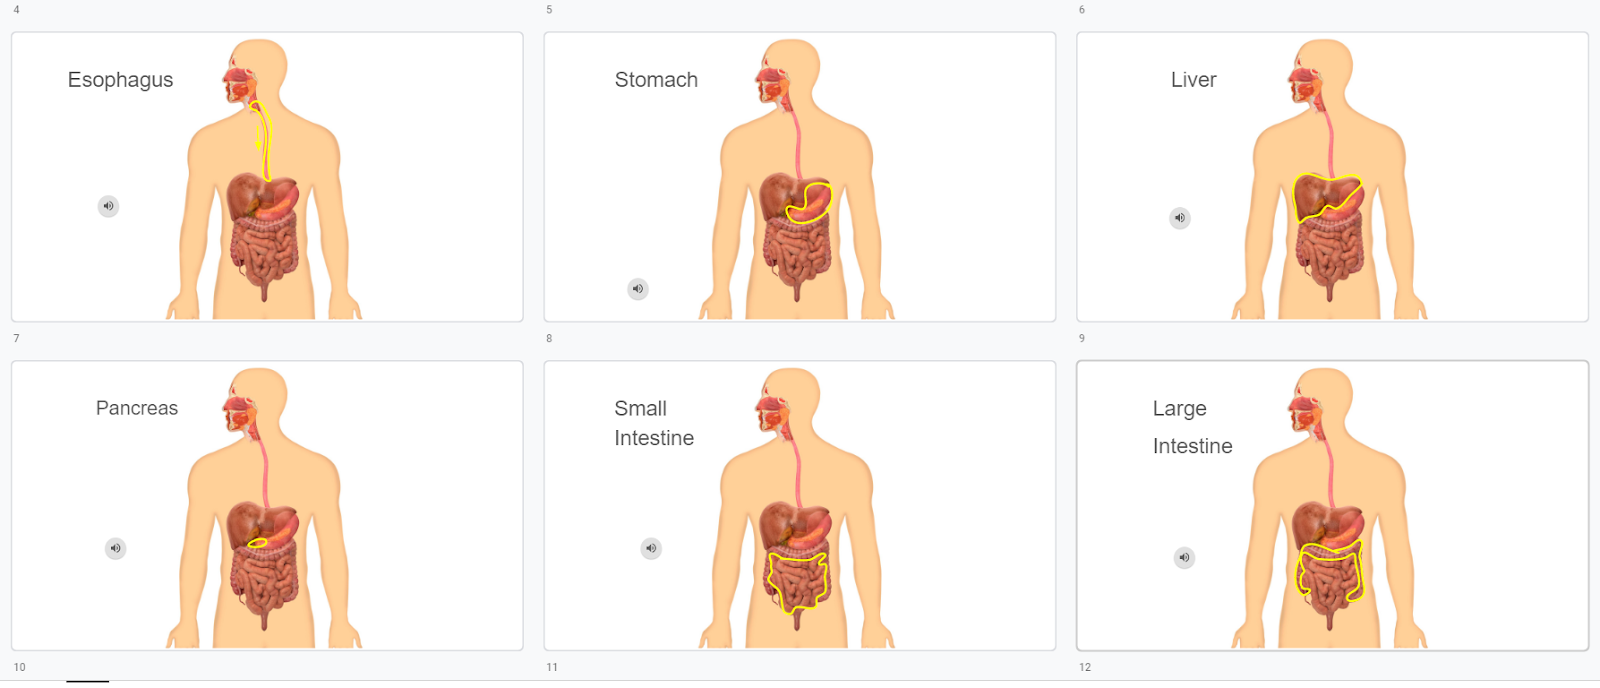 slides of the human digestive system